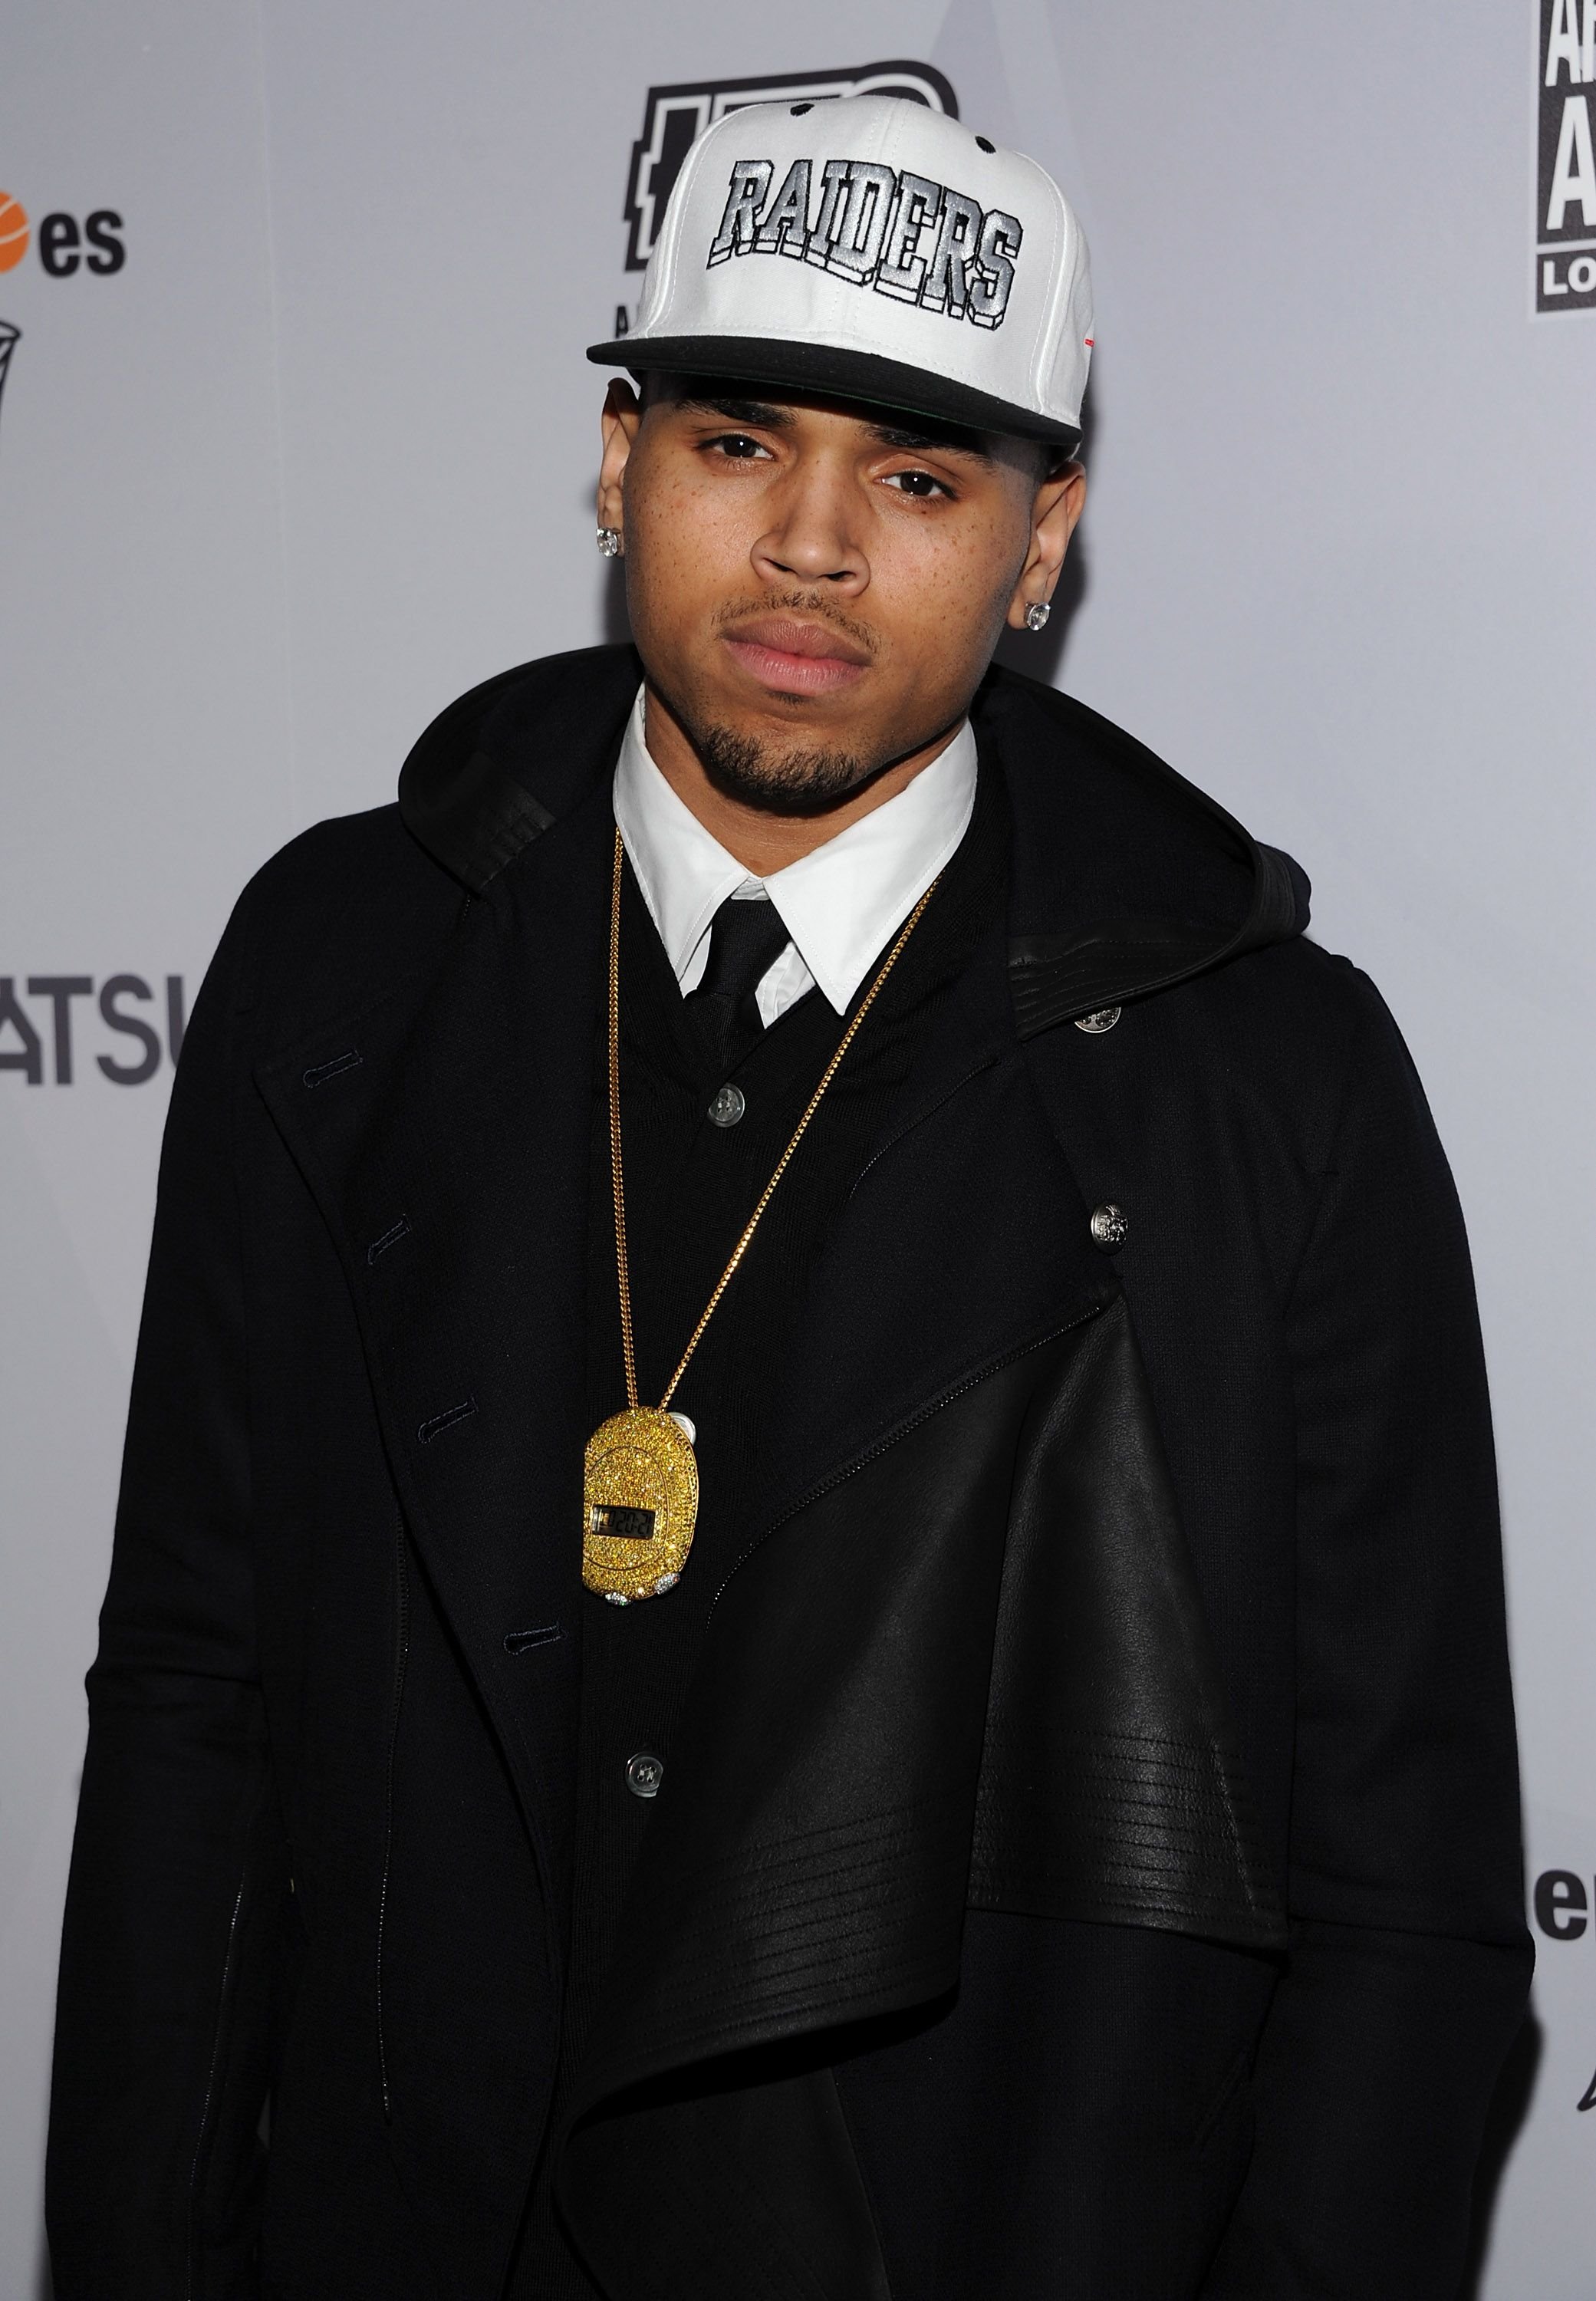 On February 18, 2011 in LA, California, artist Chris Brown arrives at the After-School All Stars (ASAS) Hoop Heroes Salute launch party at Katsuya. | Photo: Getty Images